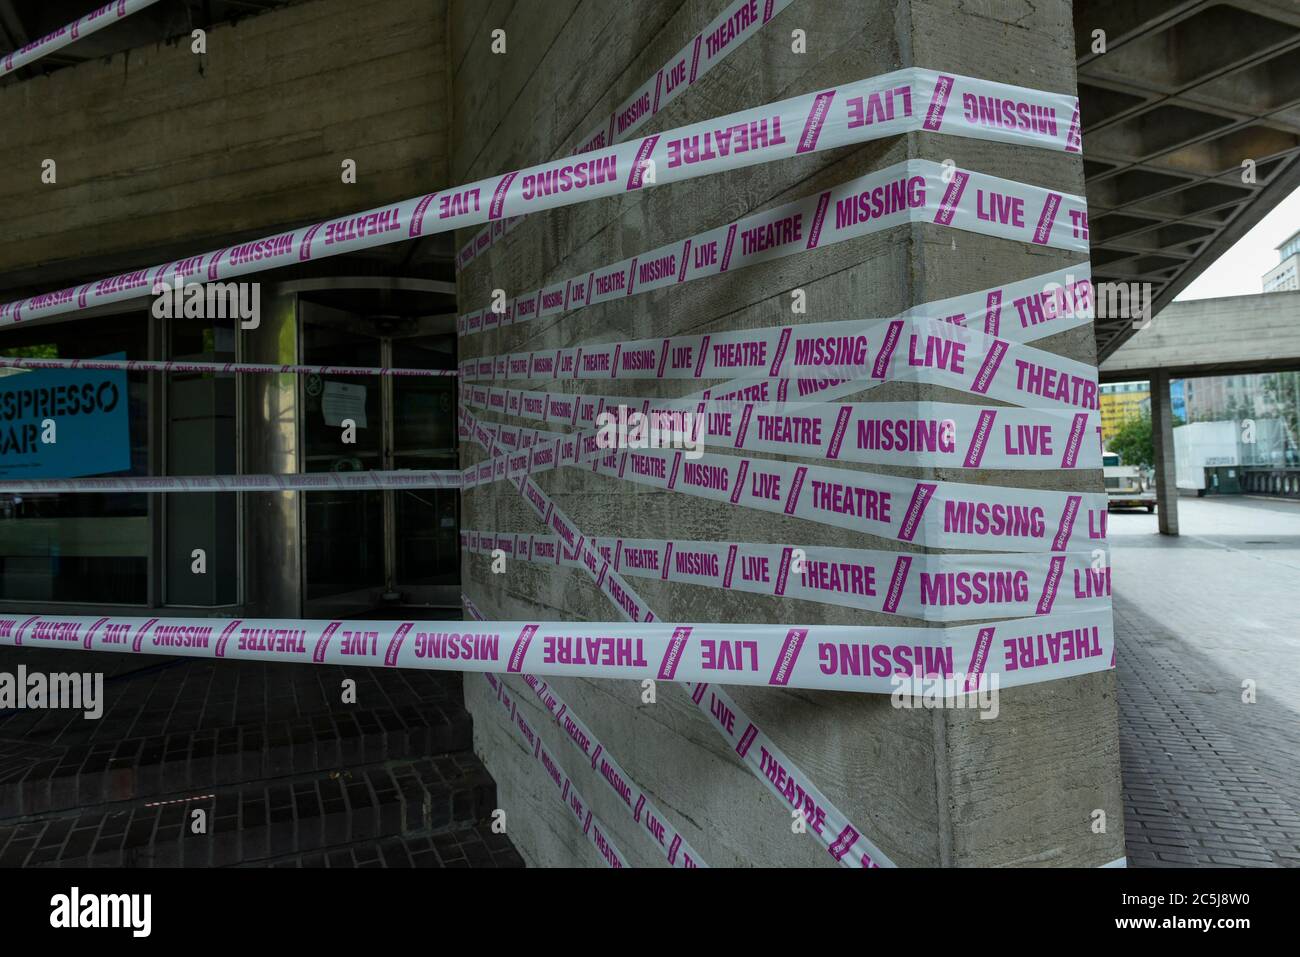 London, UK.  3 July 2020.  Pink tape has been wrapped around the National Theatre on the South Bank as part of the #MissingLiveTheatre initiative, a project by theatre designers Scene Change to support those in the live theatre industry through Covid-19 and to help theatres bring shows back into production.  So far, 50 theatres across the UK have signed up to the initiative.  Theatres are remain closed even though the UK government has relaxed certain coronavirus pandemic lockdown restrictions allowing other businesses to reopen.    Credit: Stephen Chung / Alamy Live News Stock Photo